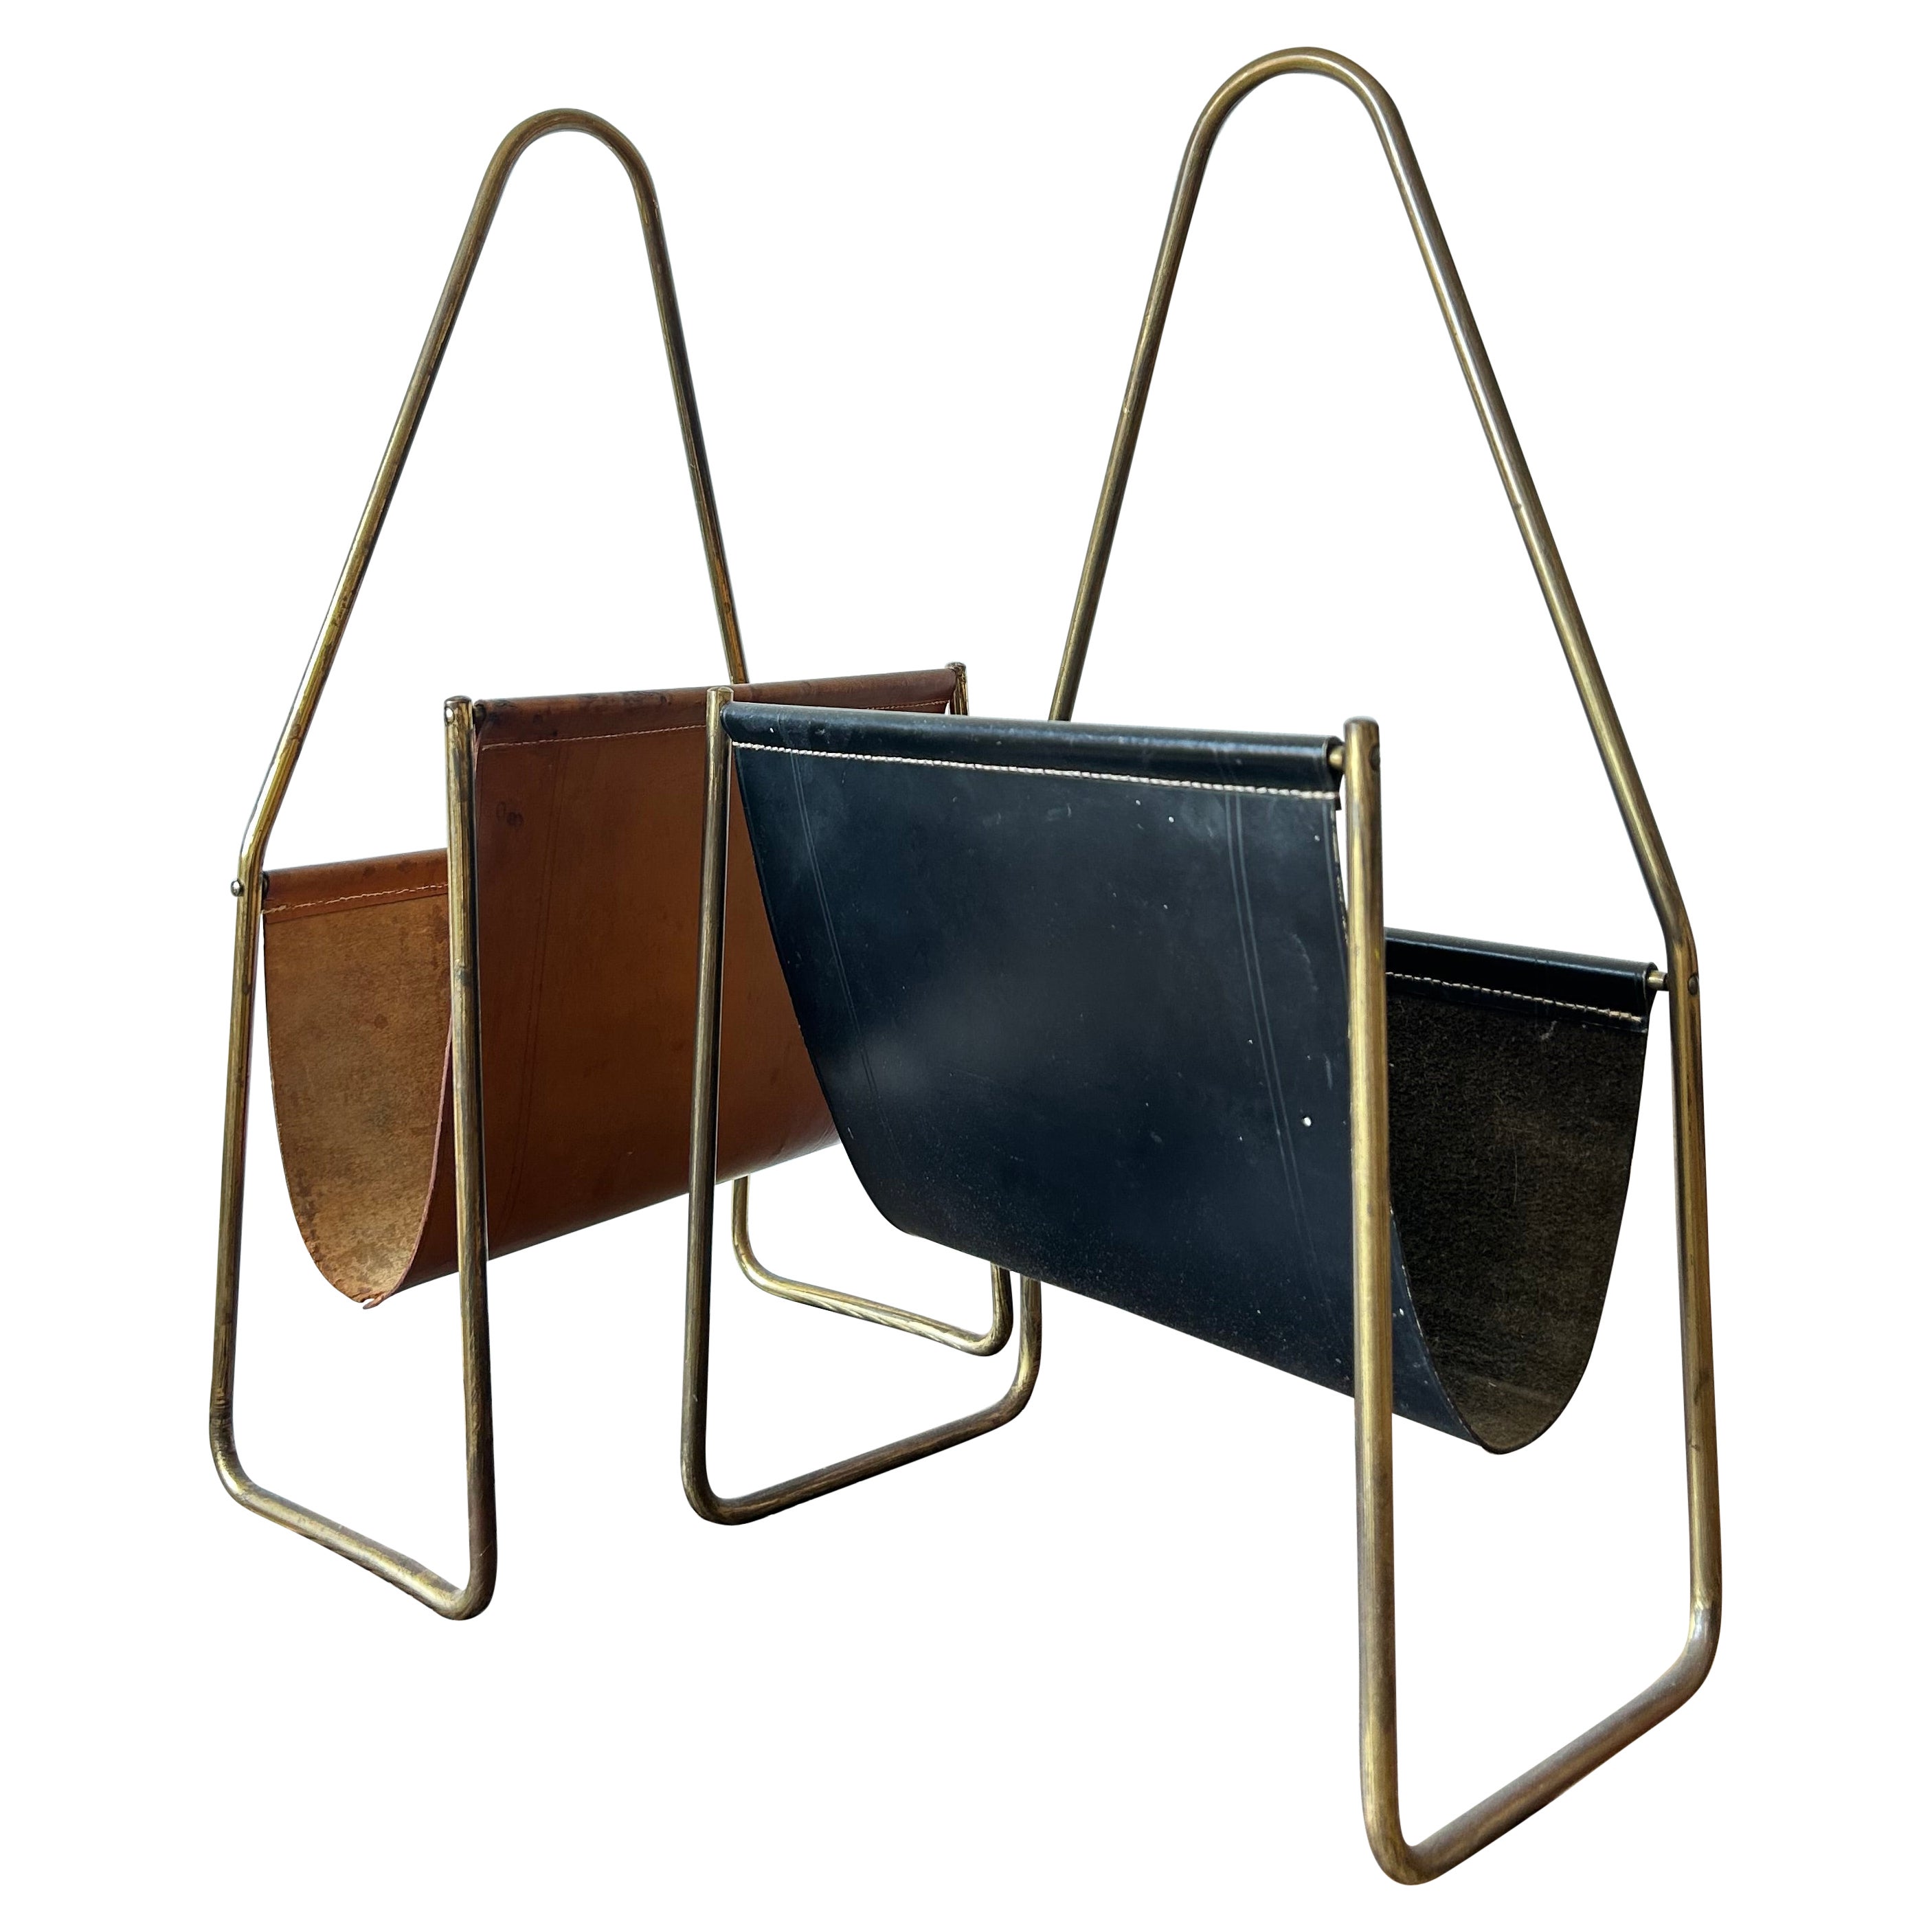 Pair of Carl Auböck Magazine Holders Brass and Leather